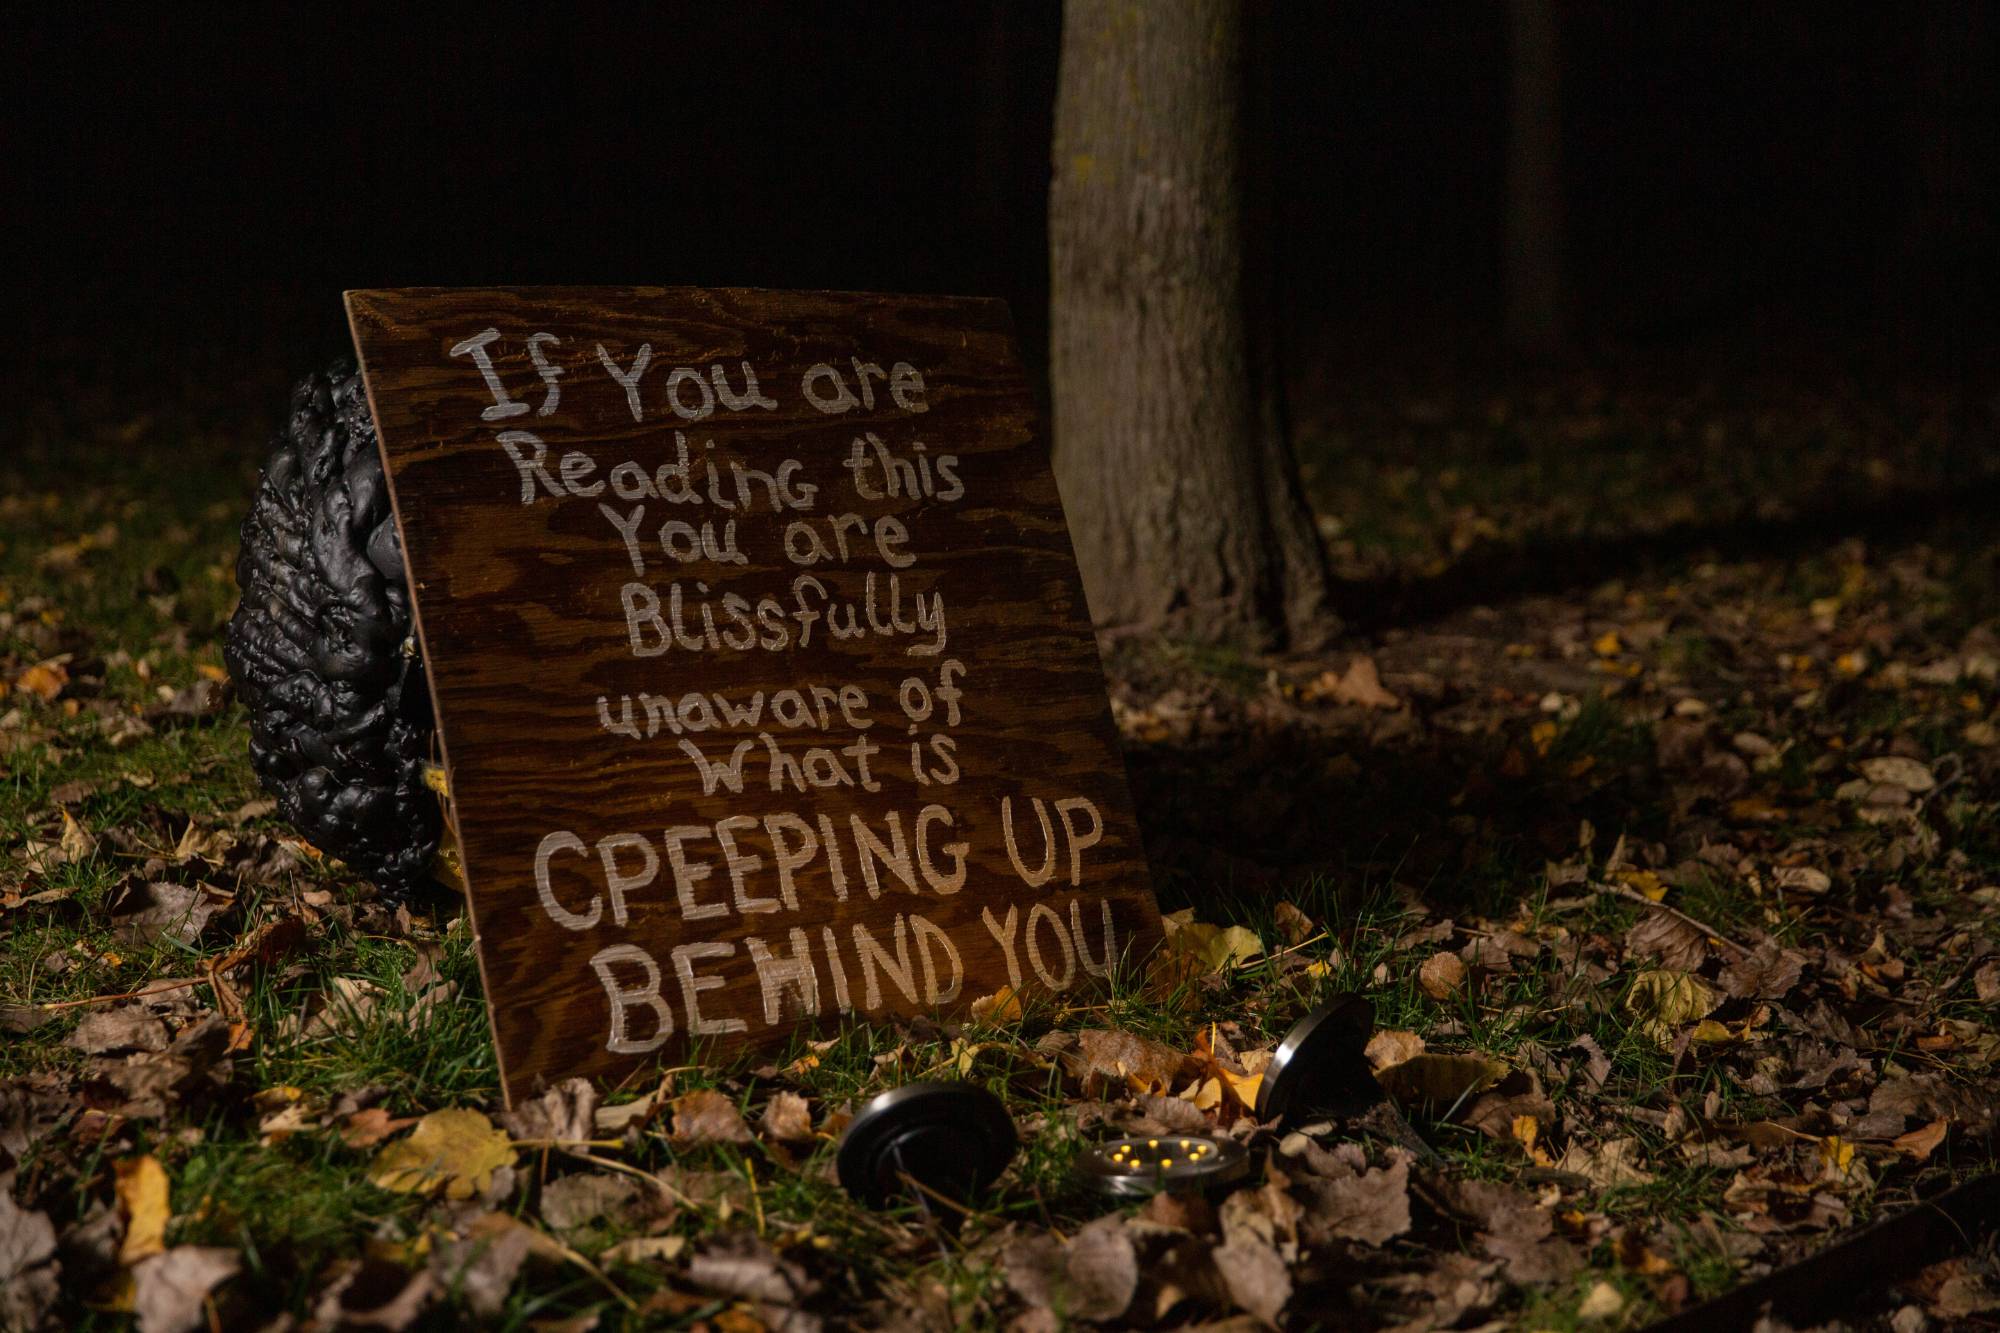 Wooden sign that reads "If you are reading this you are blissfully unaware of what is creeping up behind you".